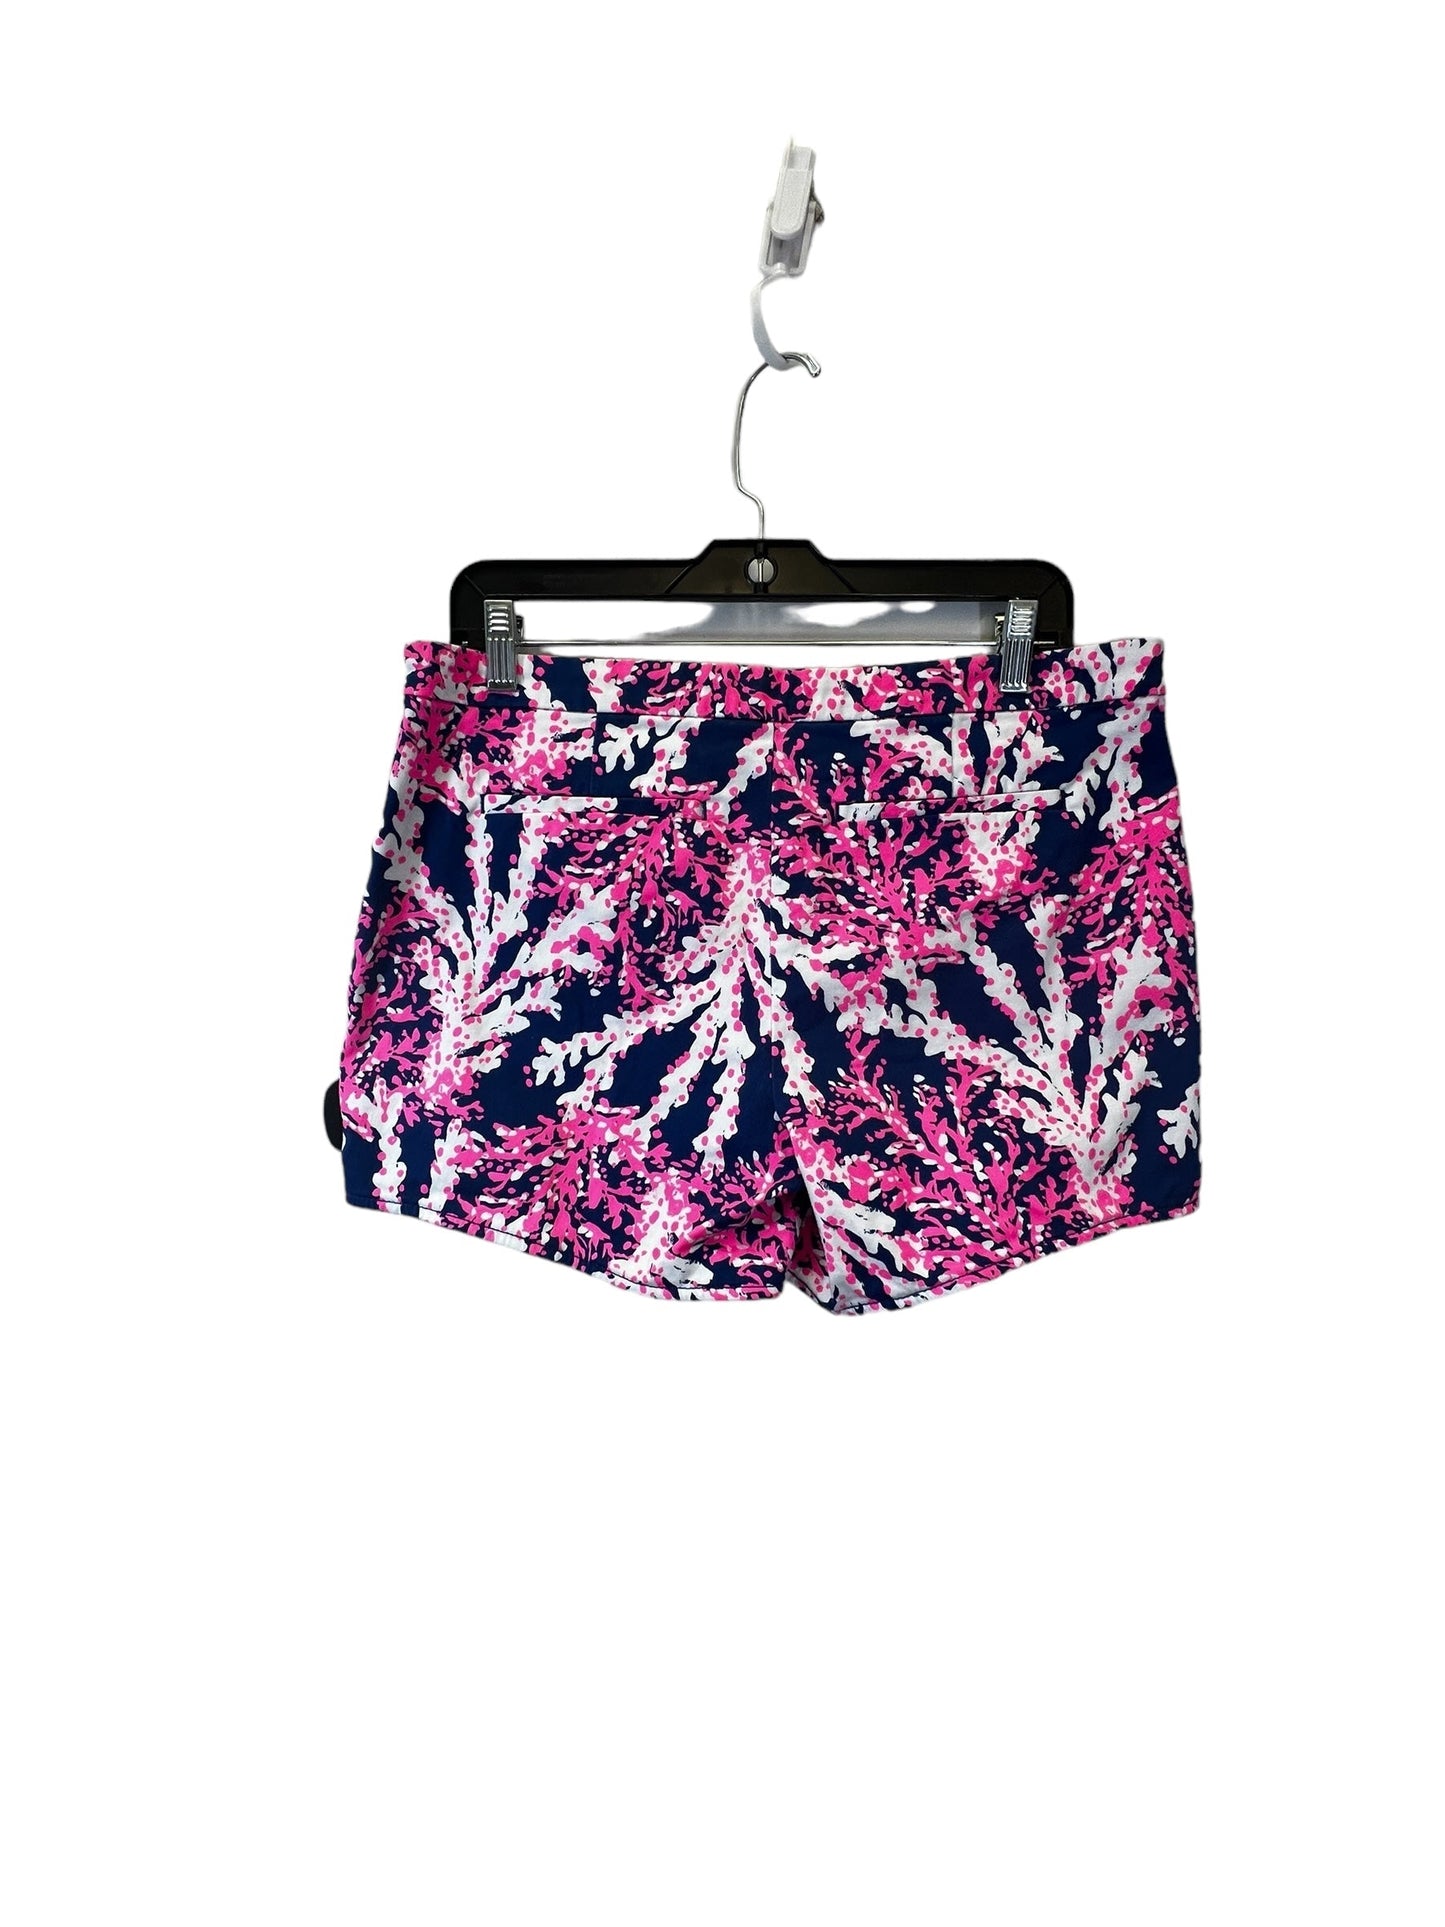 Blue & Pink Shorts Lilly Pulitzer, Size 10